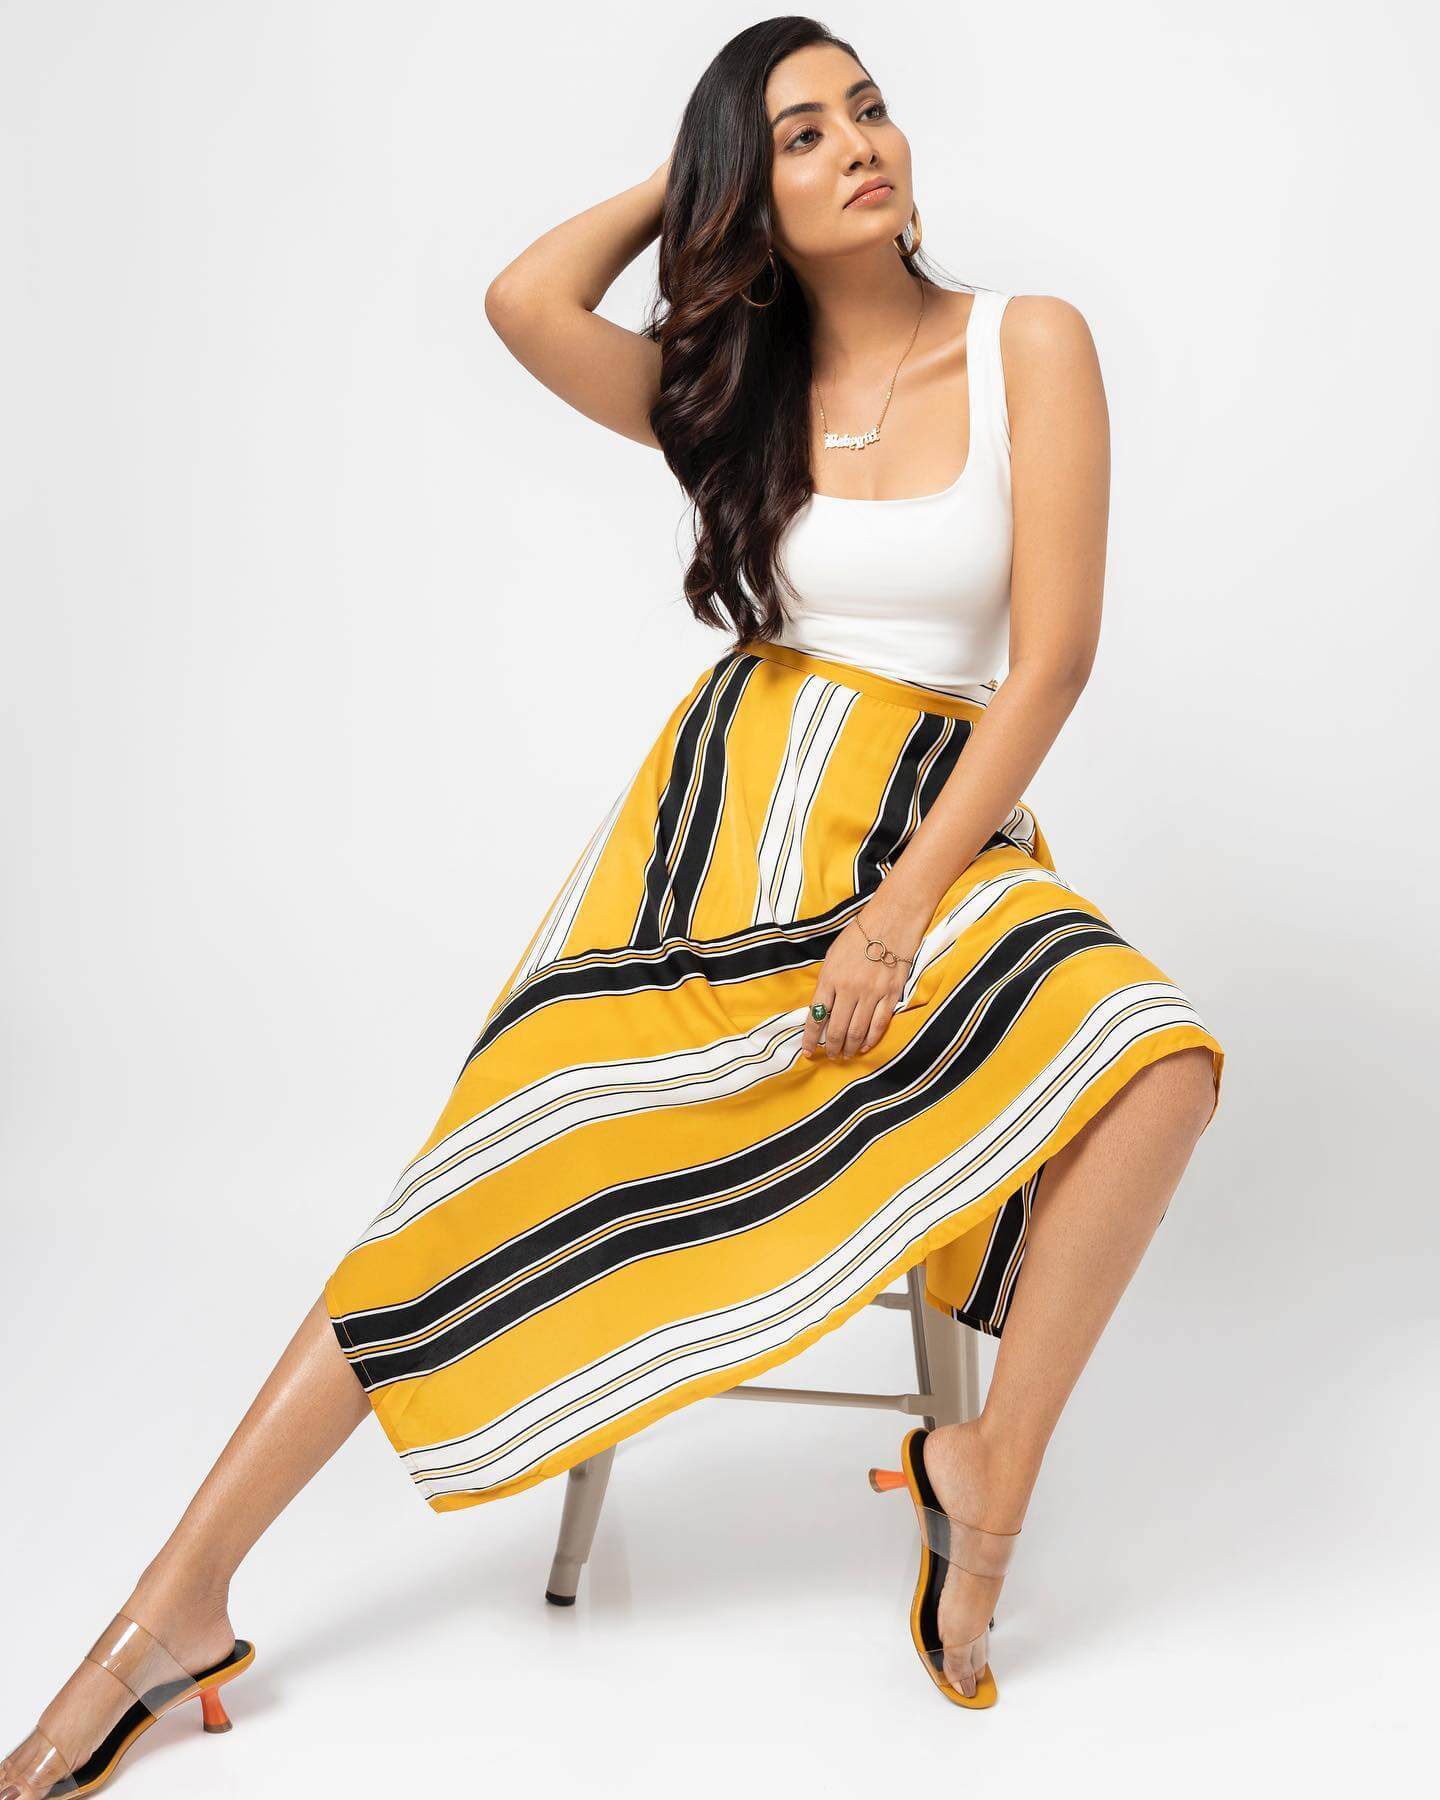 South Actress Swathi Muppala In White Tank Top With Printed Yellow Skirt Simple Yet Sexy Trendy Outfits & Looks